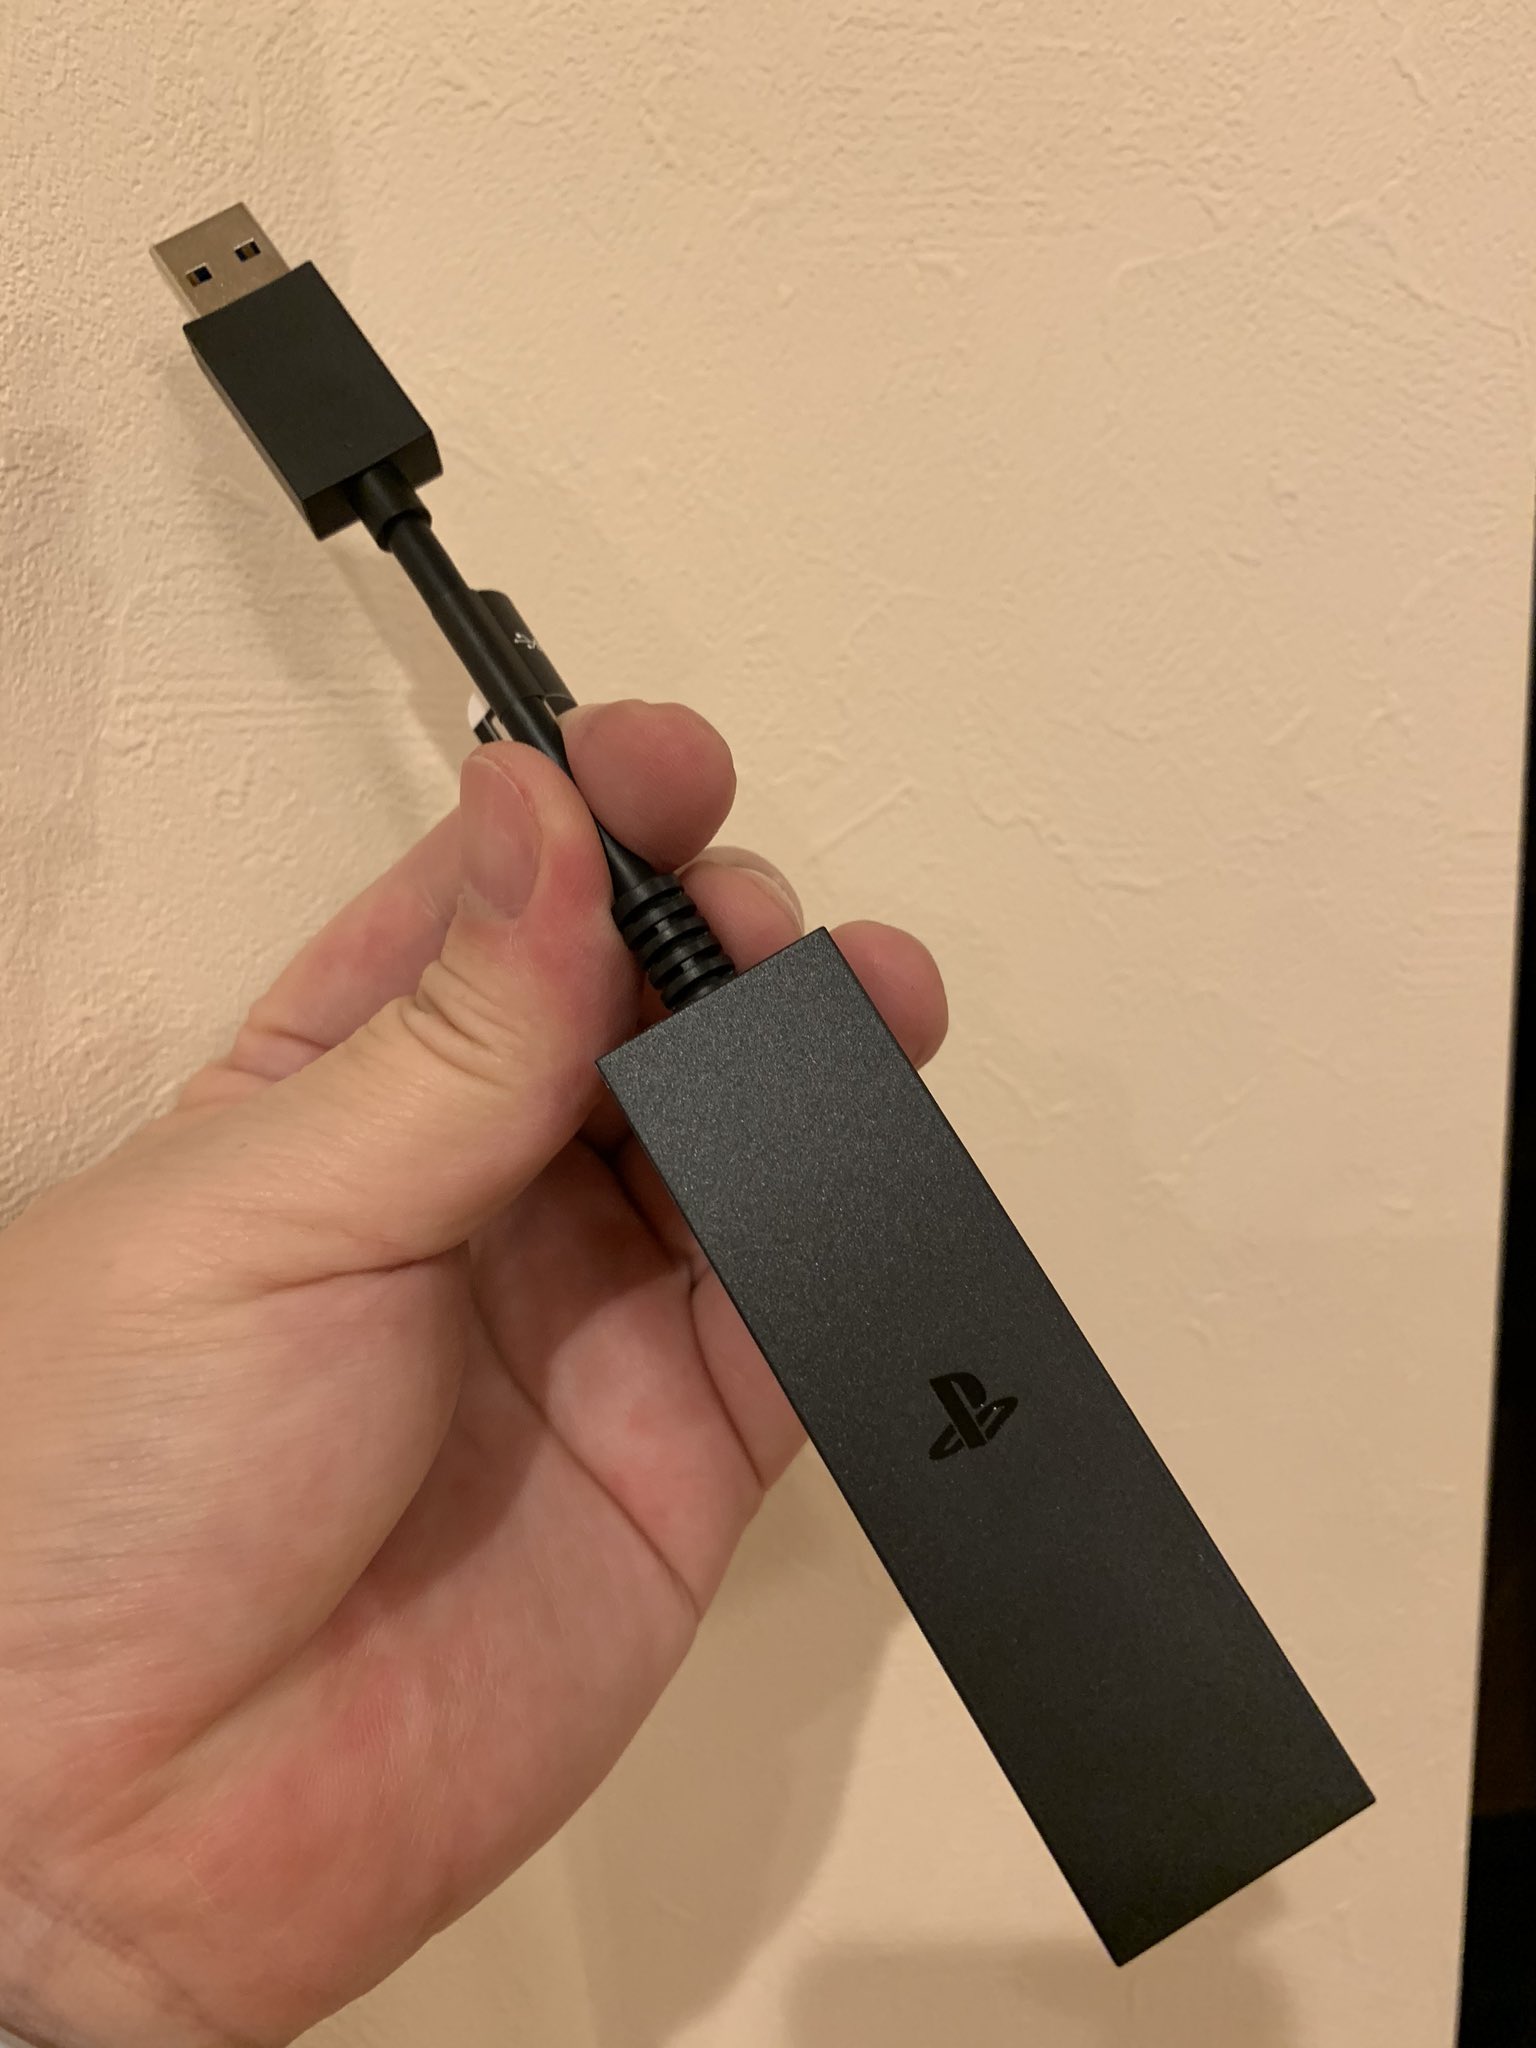 Mineraalwater Broek Slechte factor Here's a look at the PlayStation 5 camera adaptor and details of how to get  one | TheSixthAxis